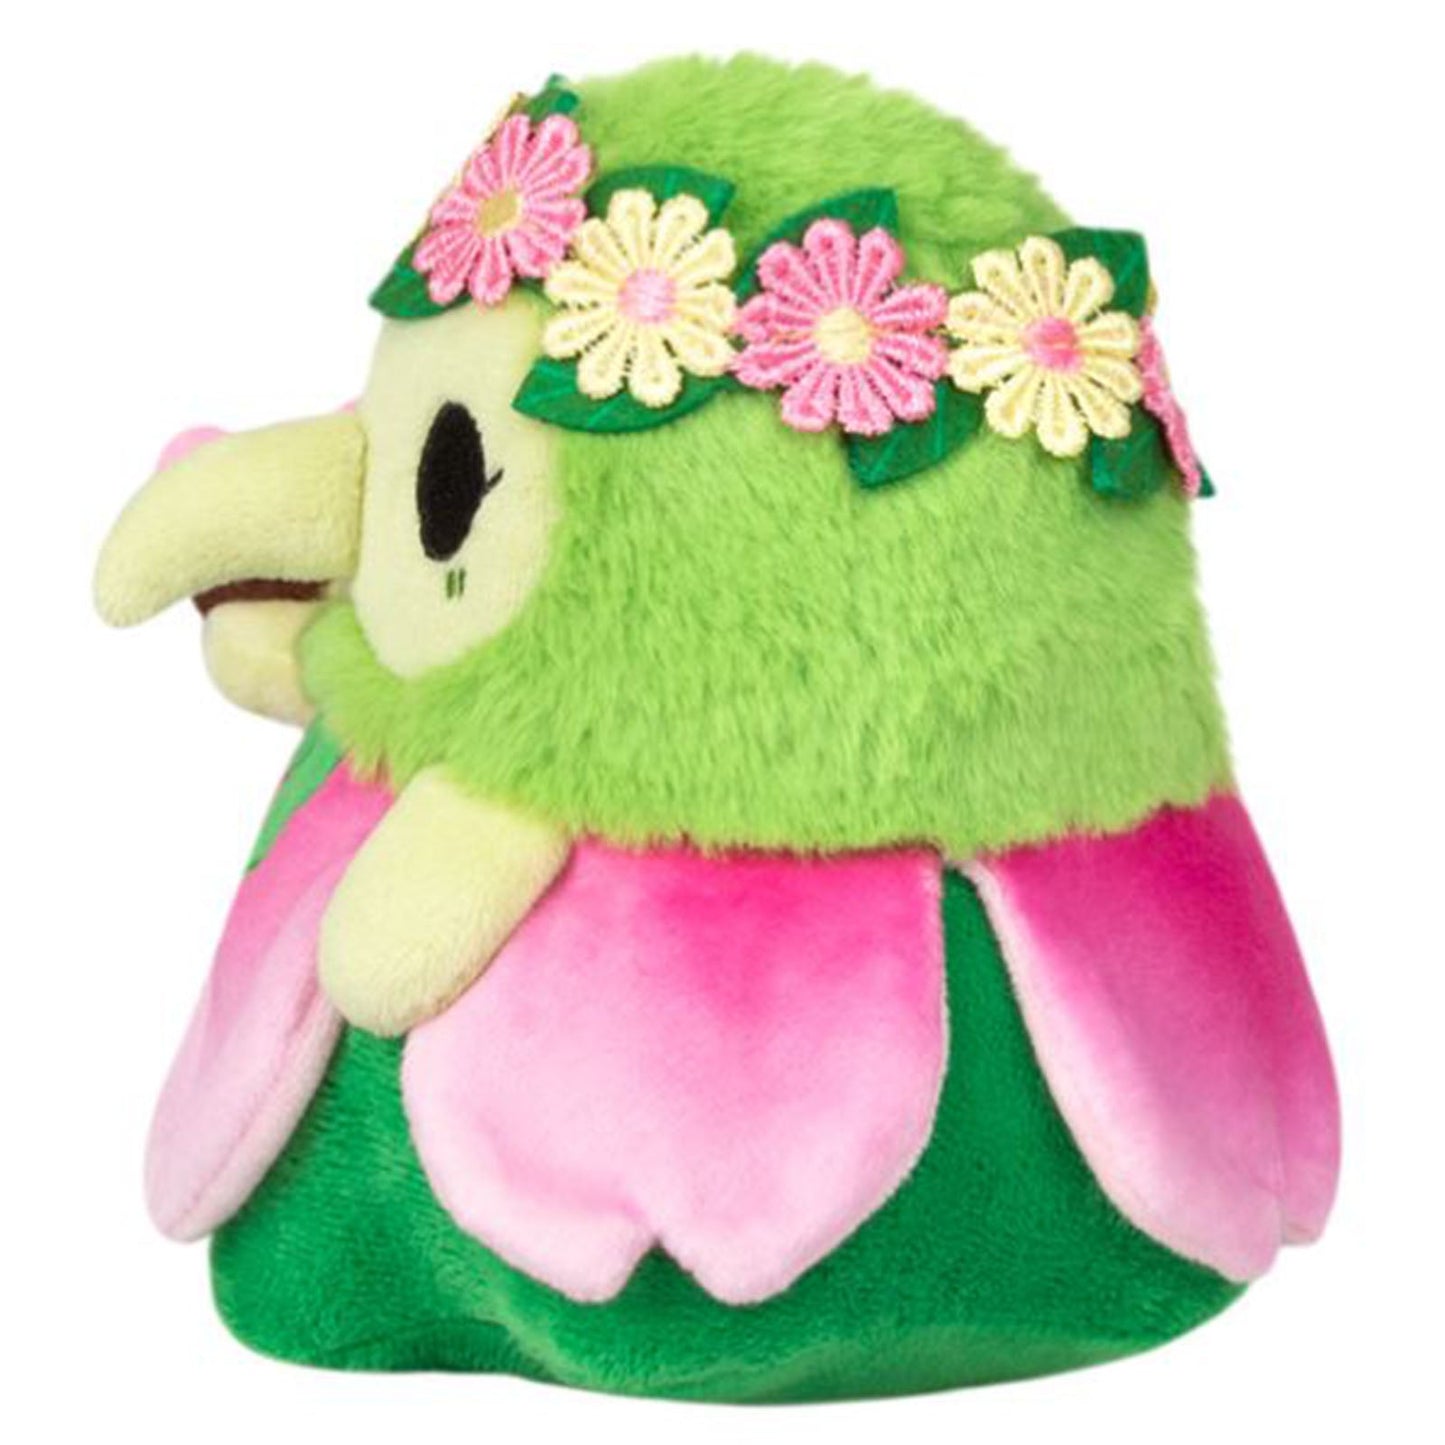 Squishable Alter Ego Plague Doctor Nymph 6 Inch Plush